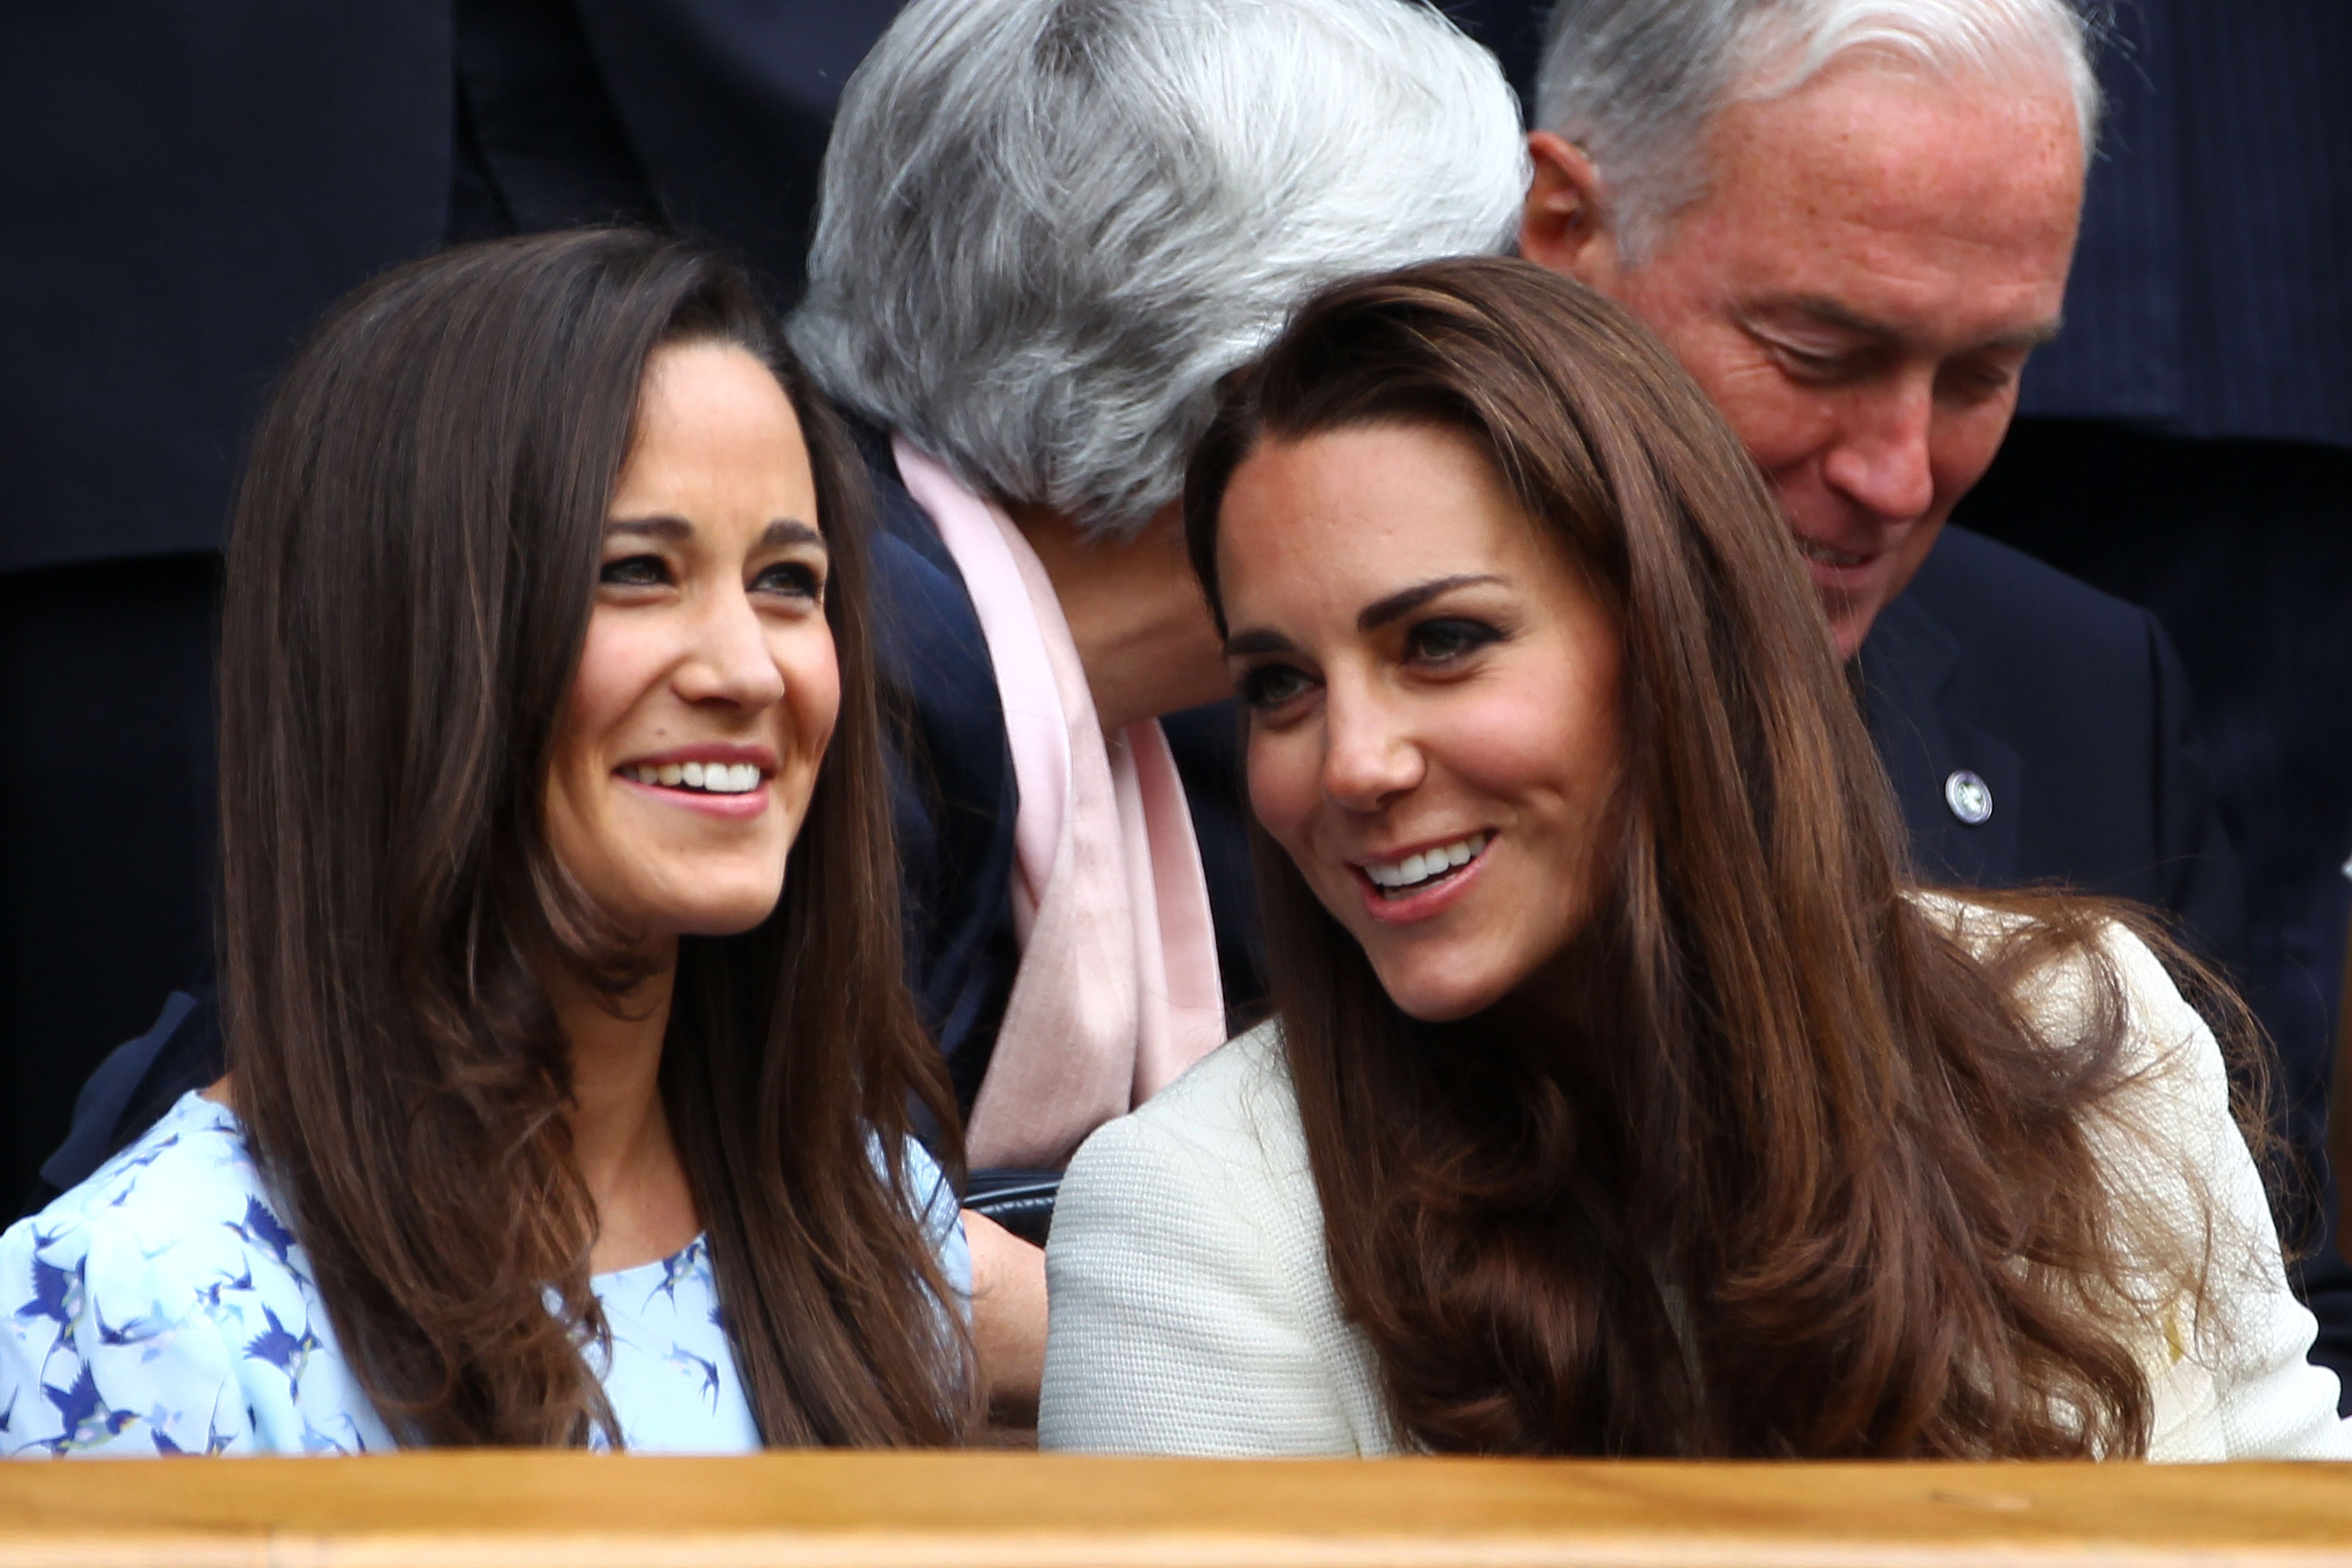 Kate and Pippa MIddleton during the Gentlemen's Singles final match of the Wimbledon Lawn Tennis Championships at the All England Lawn Tennis and Croquet Club on July 8, 2012, in London, England. | Source: Getty Images